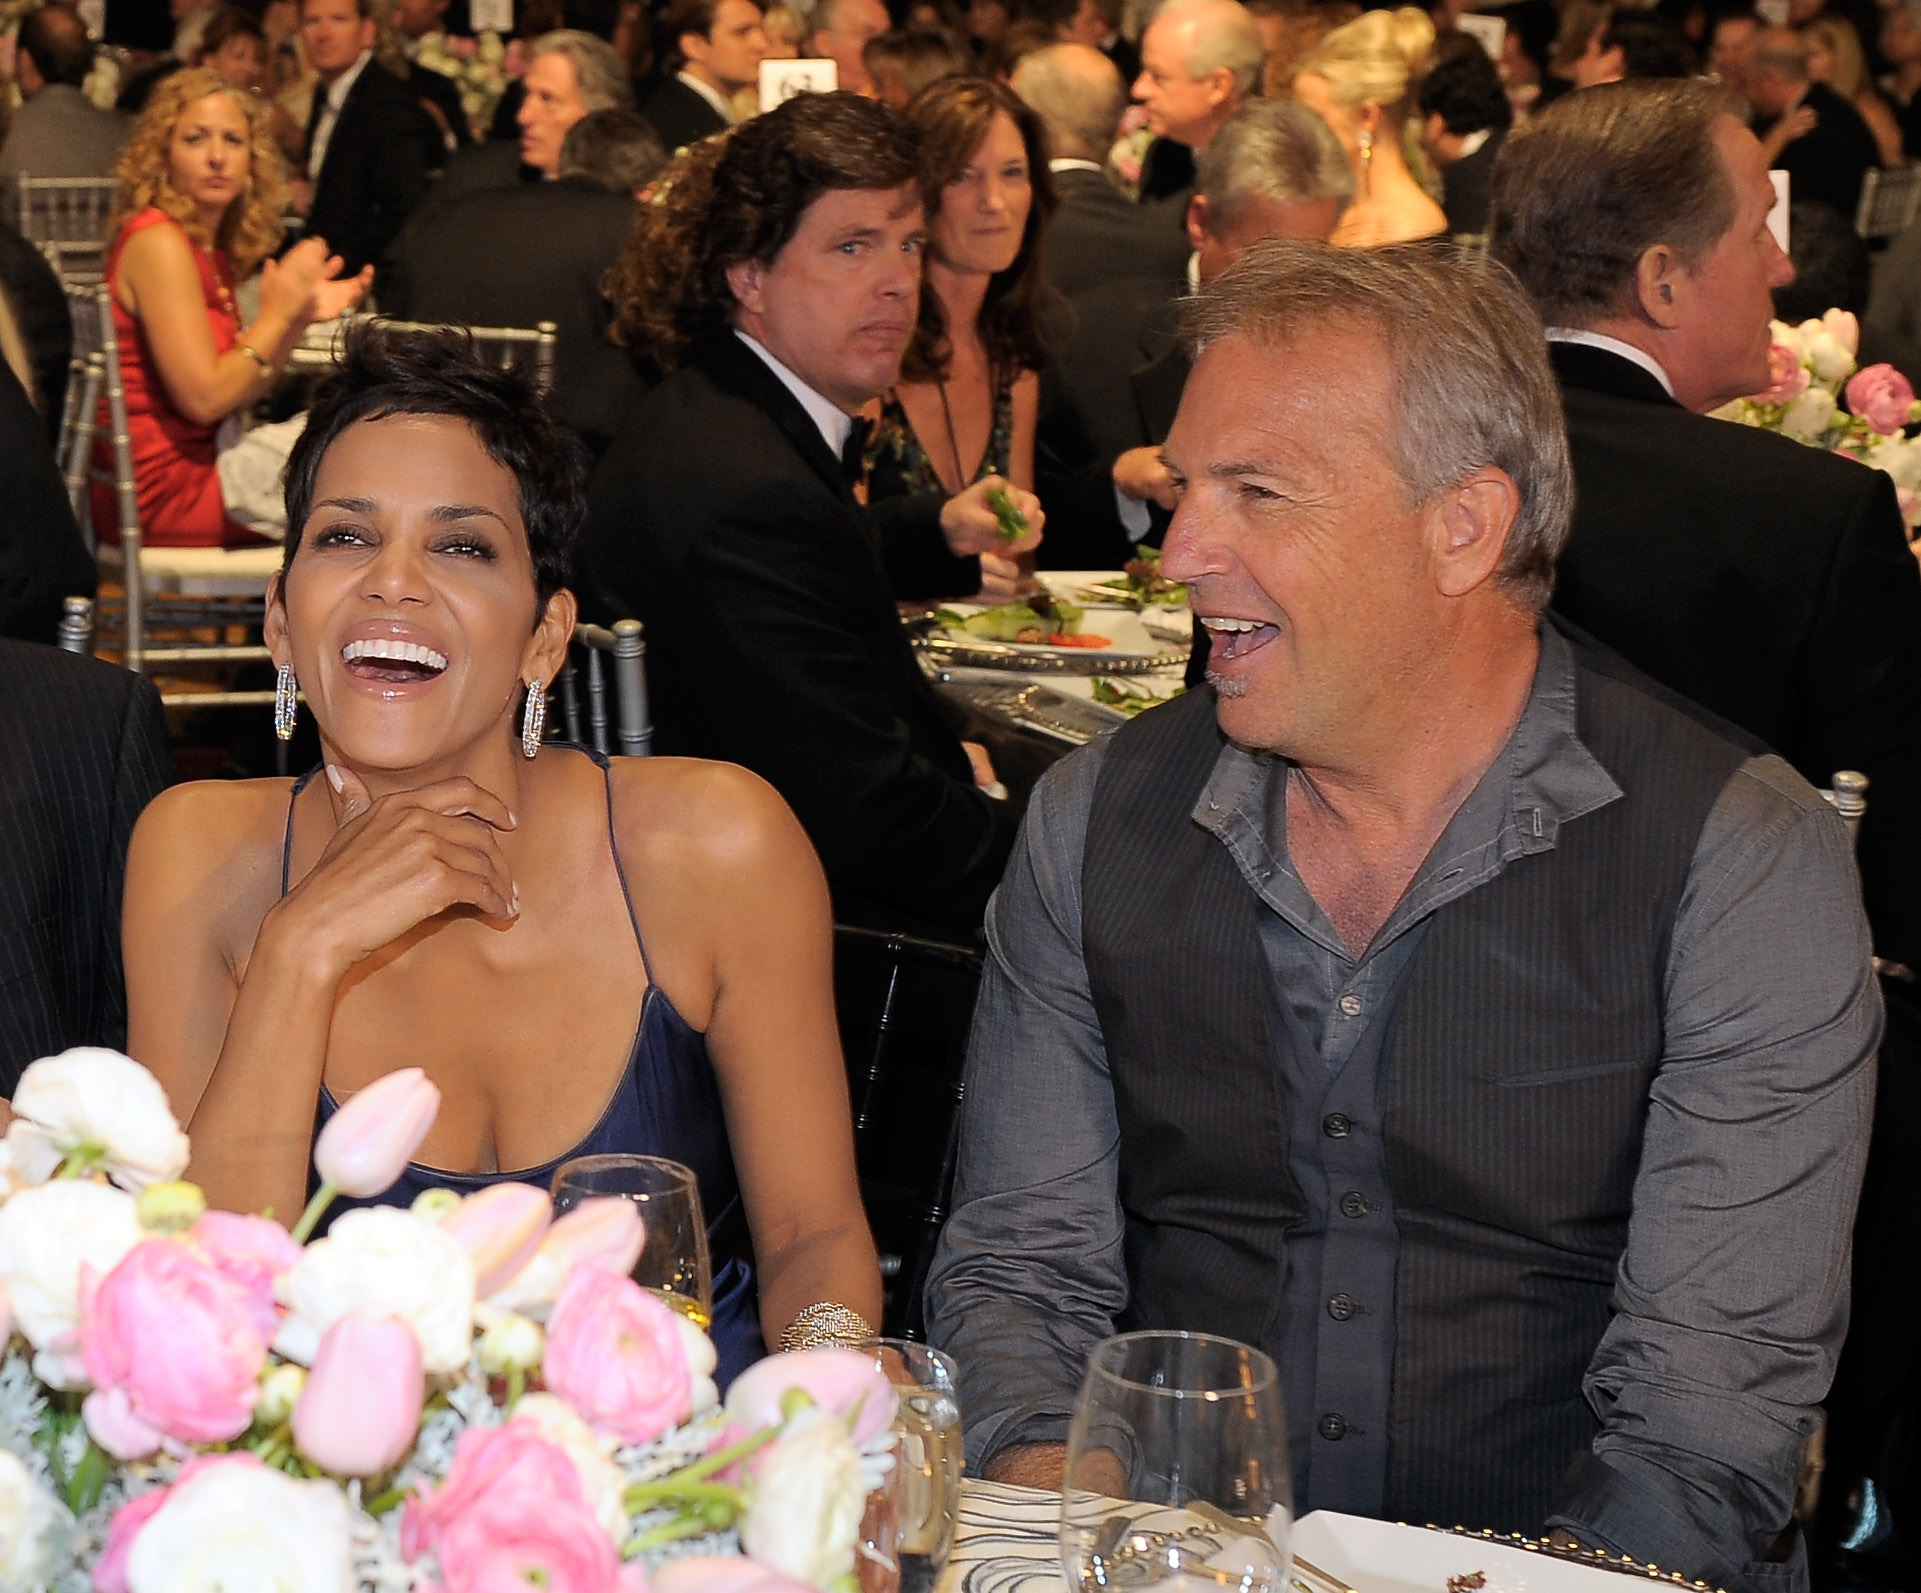 Kevin Costner and Halle Berry